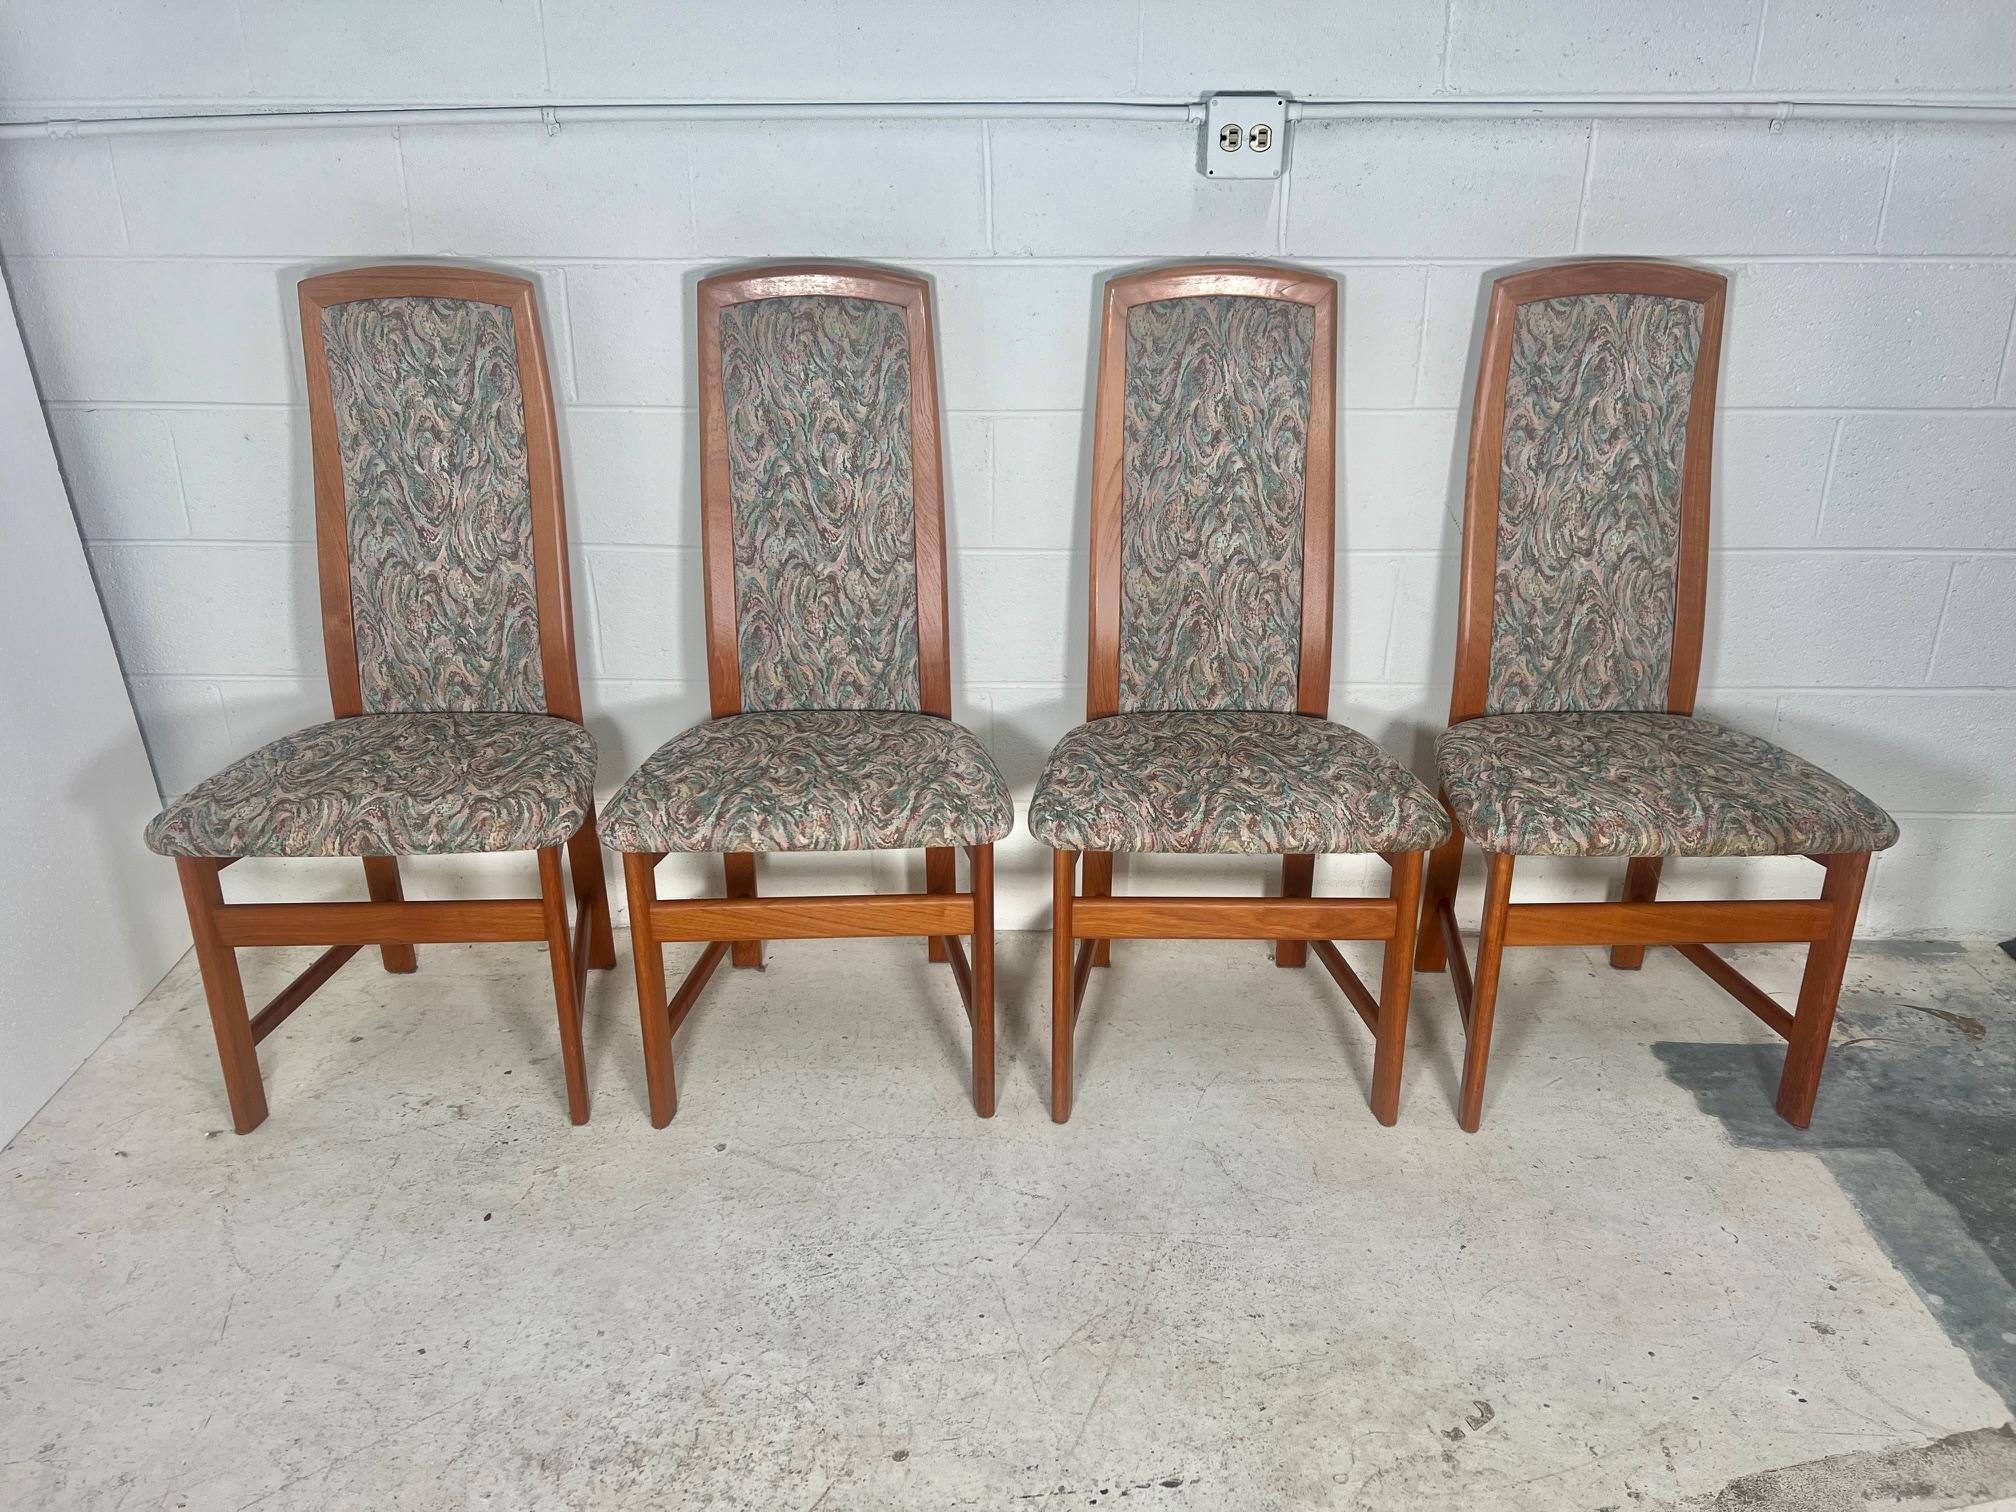 Beautiful set of 4 mid century Danish Modern teak dining chairs with padded fabric back. Made by Nordic Furniture, Markdale Ontario Canada. Stamped underneath.

Very good condition. All the chairs are very sturdy. Upholstery appears to be original.